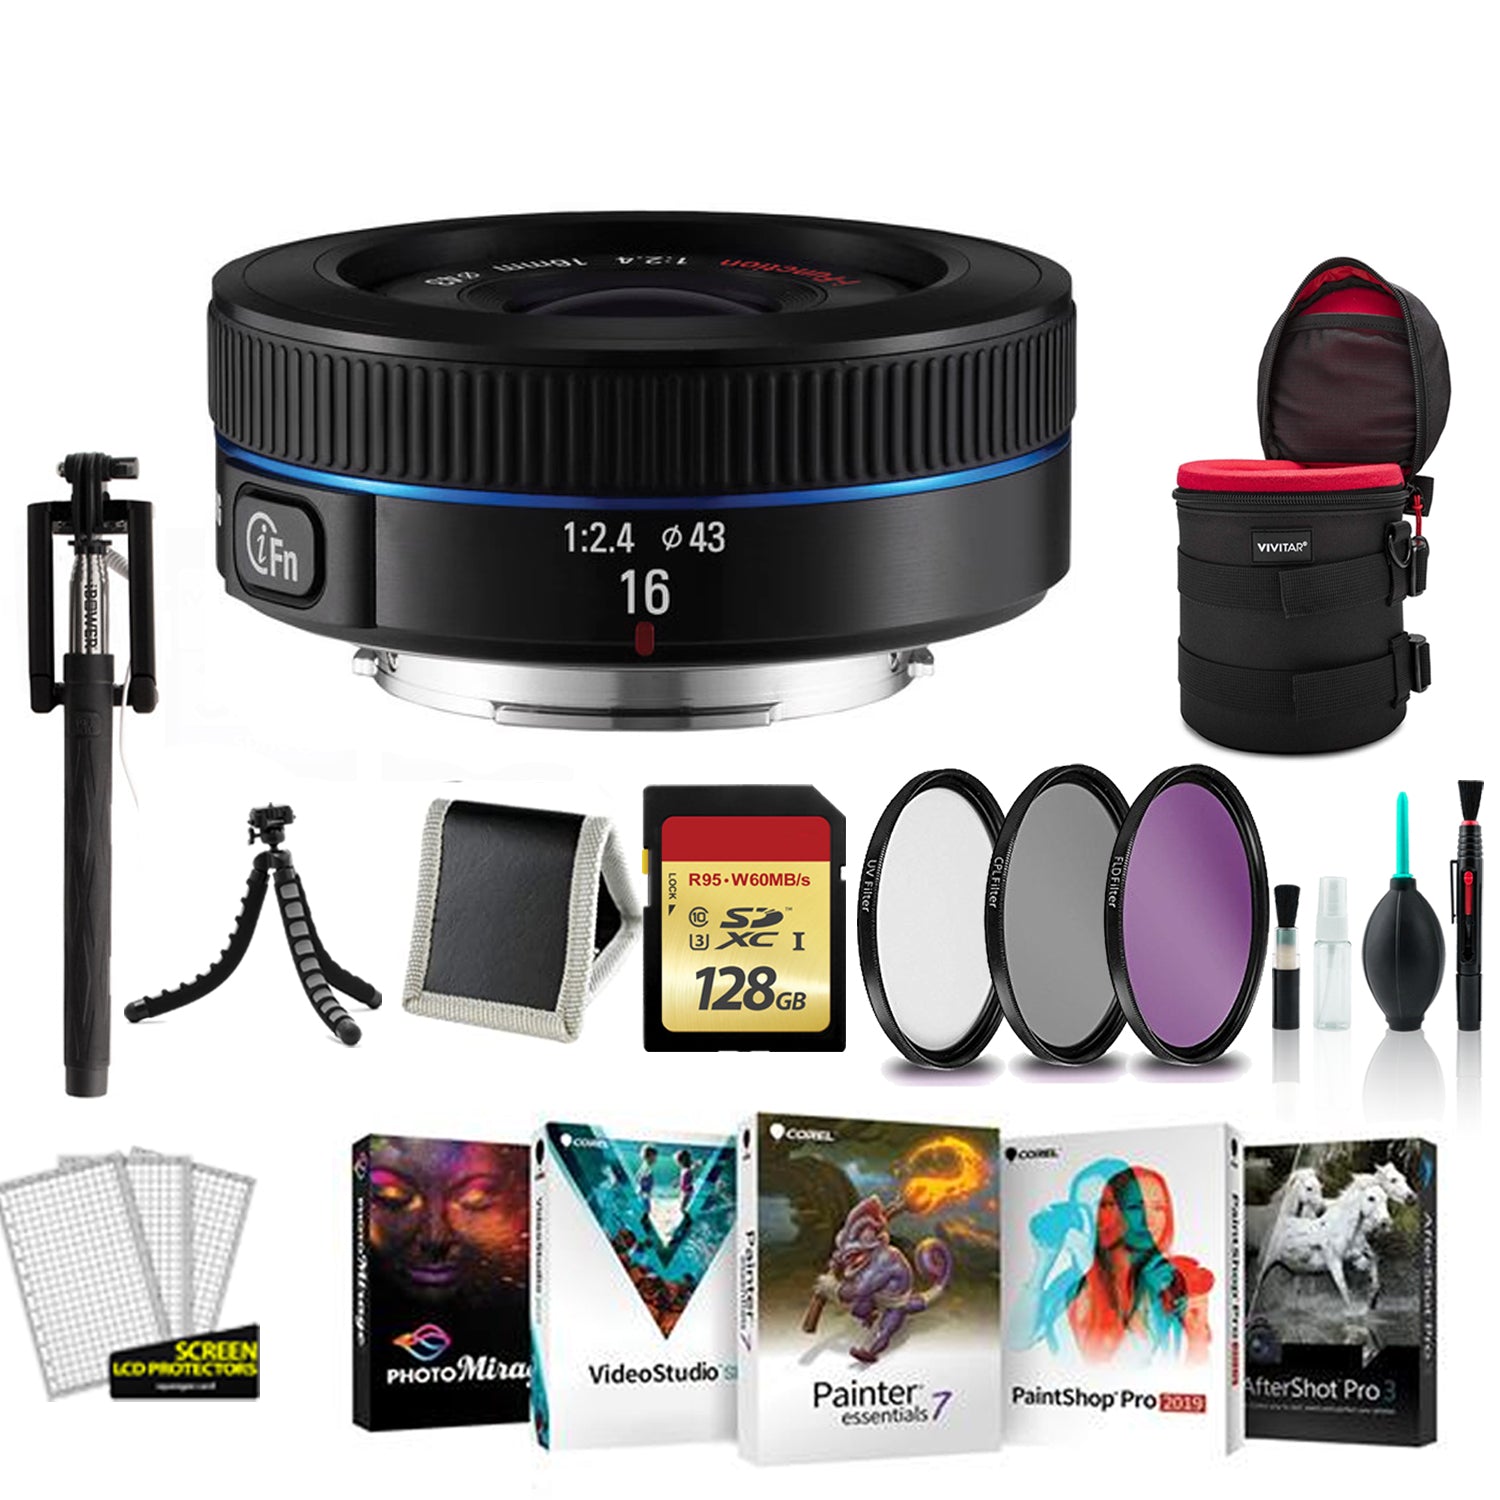 Samsung 16mm F/2.4 Wide Lens for Samsung NX Camera - Kit with 128GB Memory Card